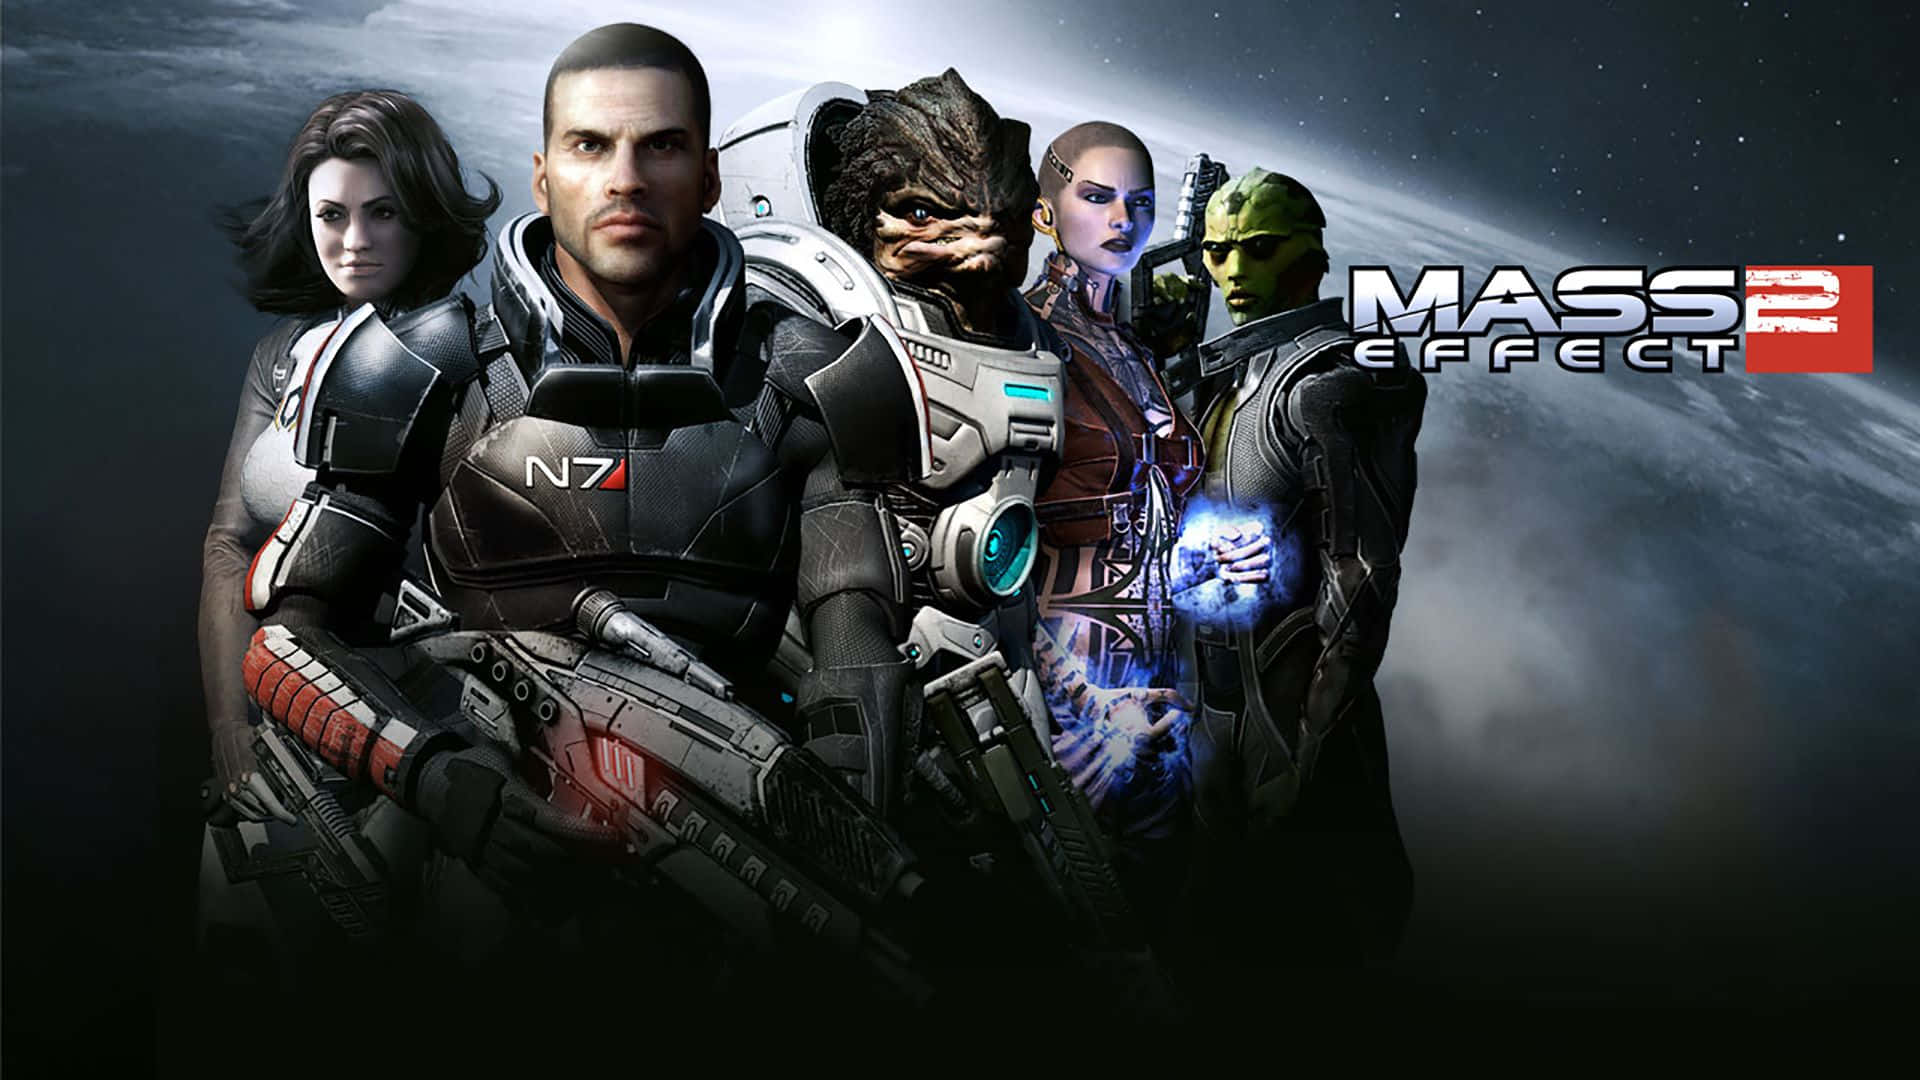 Commander Shepard and crew ready for battle in Mass Effect 2 Wallpaper